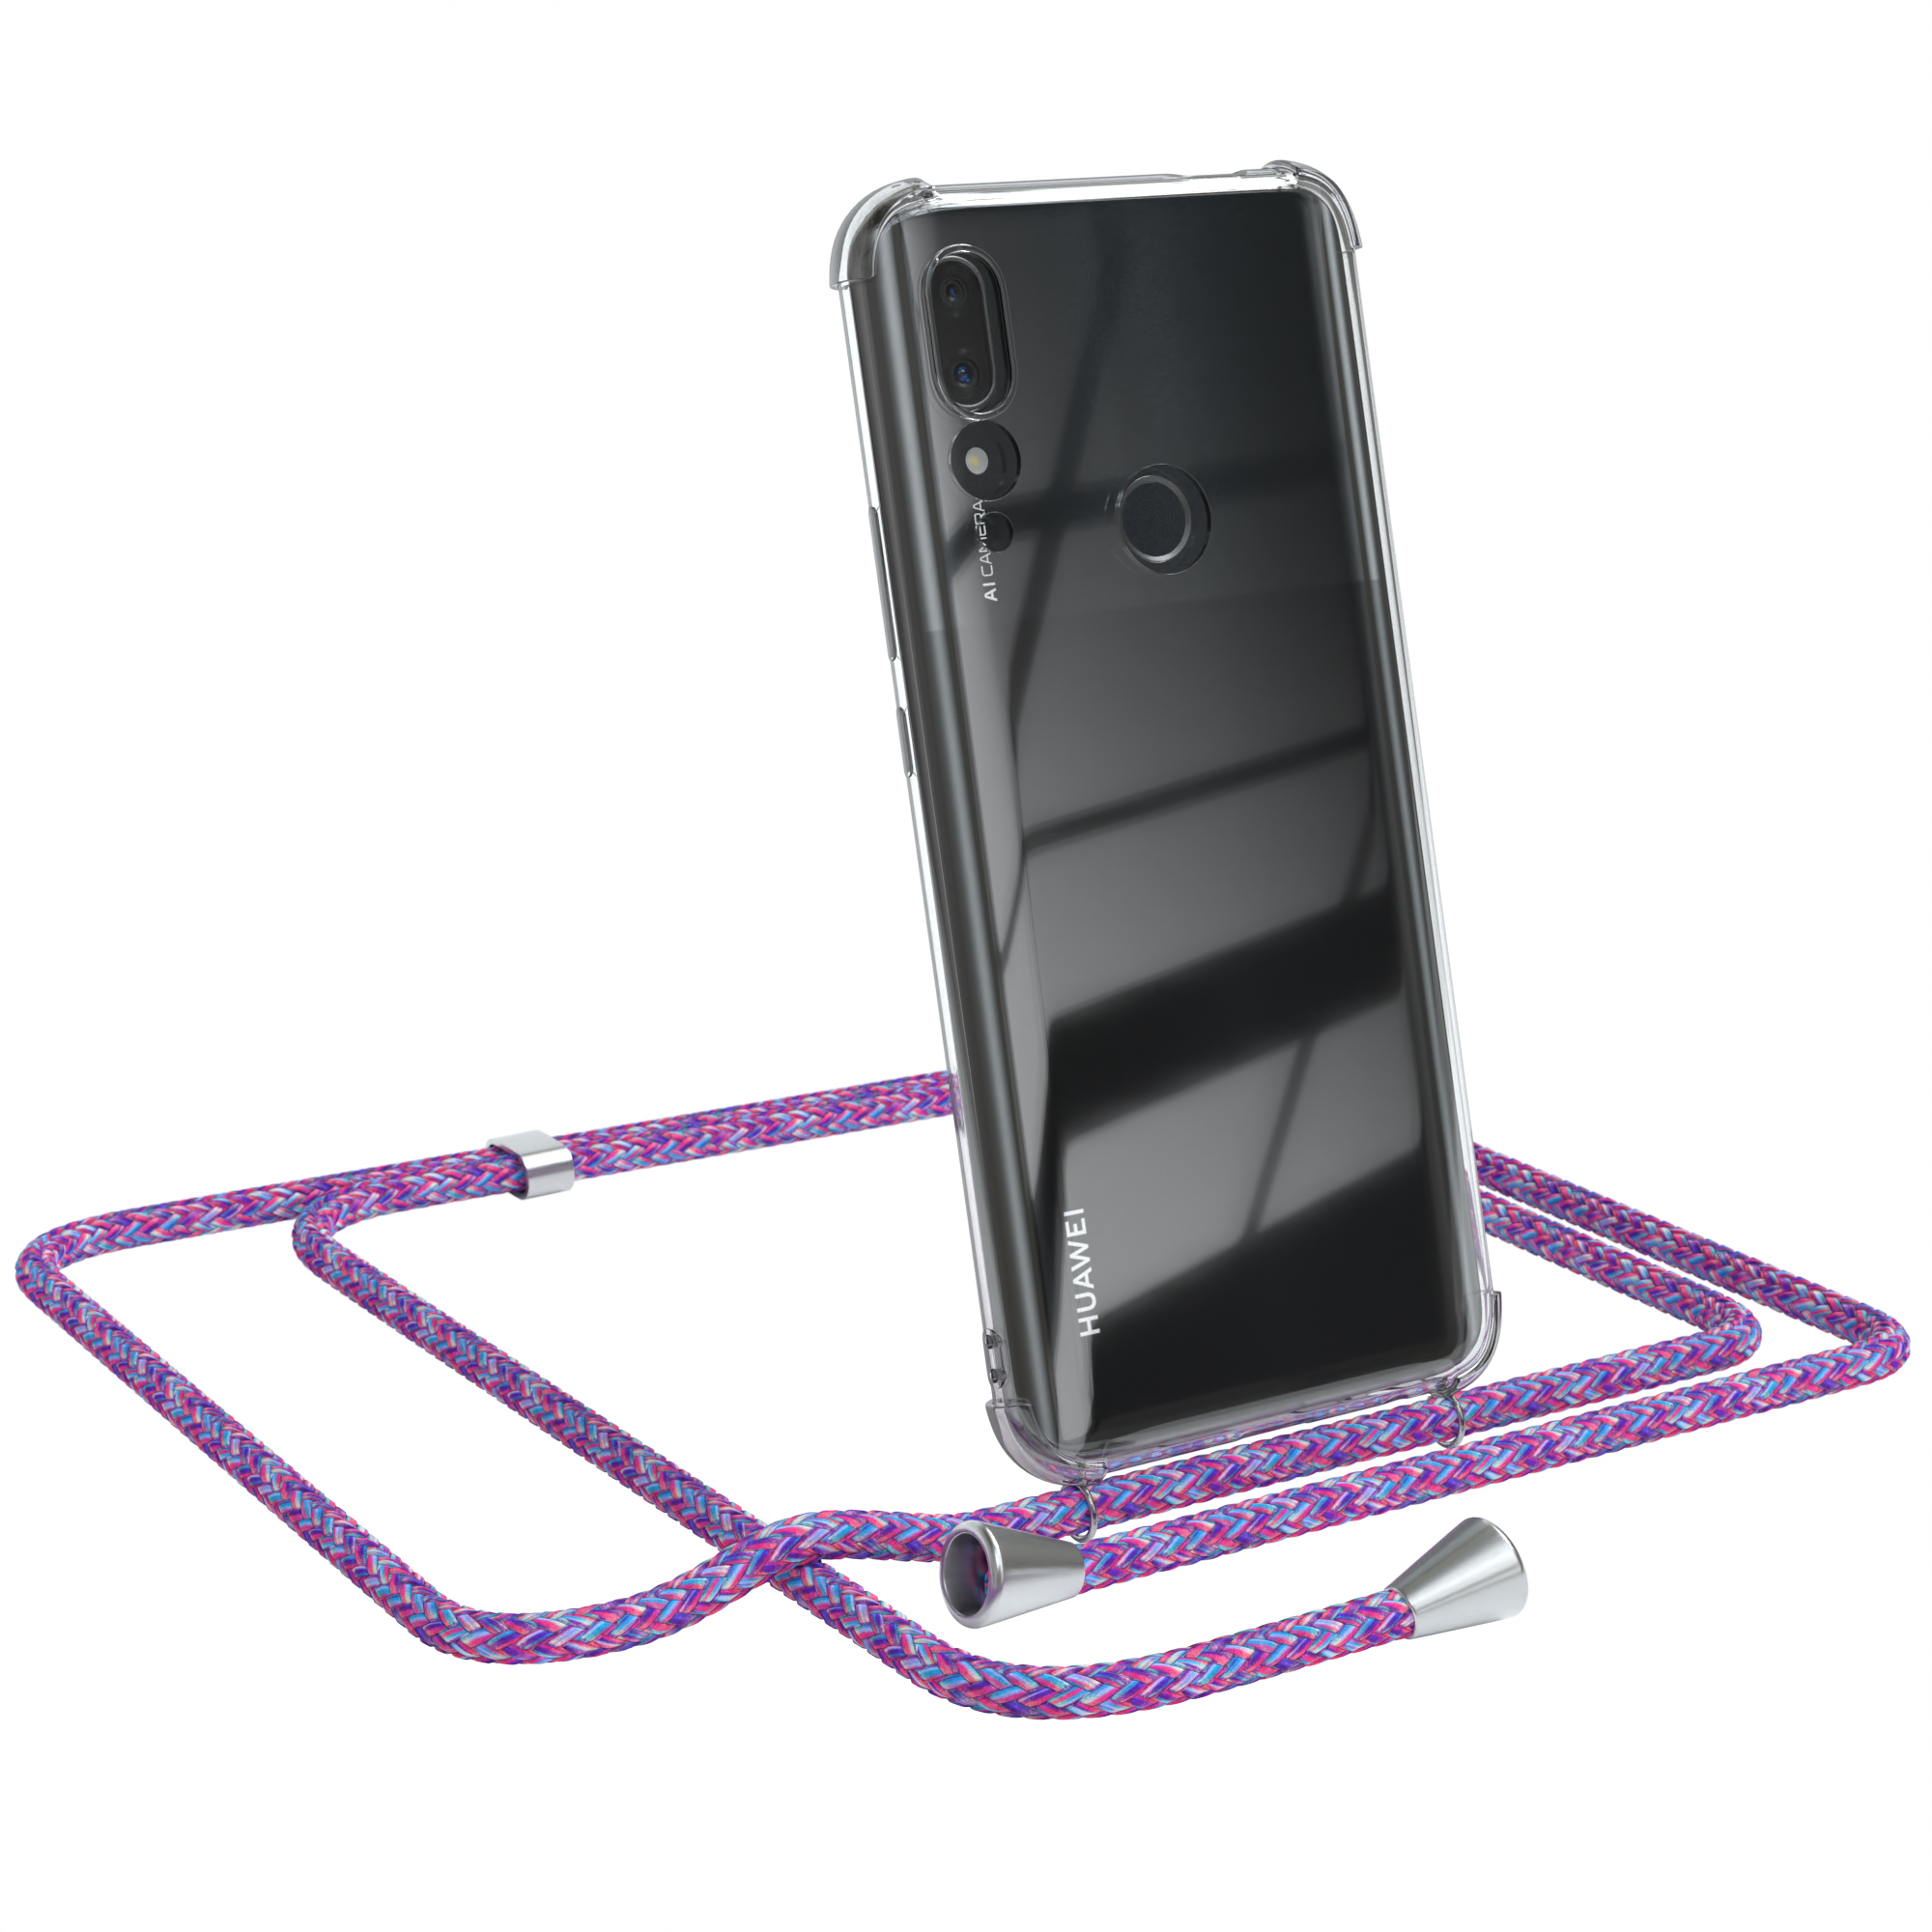 EAZY CASE Clear Cover mit Umhängetasche, Prime Umhängeband, P Smart / (2019), Lila Y9 Huawei, Silber Z / Clips